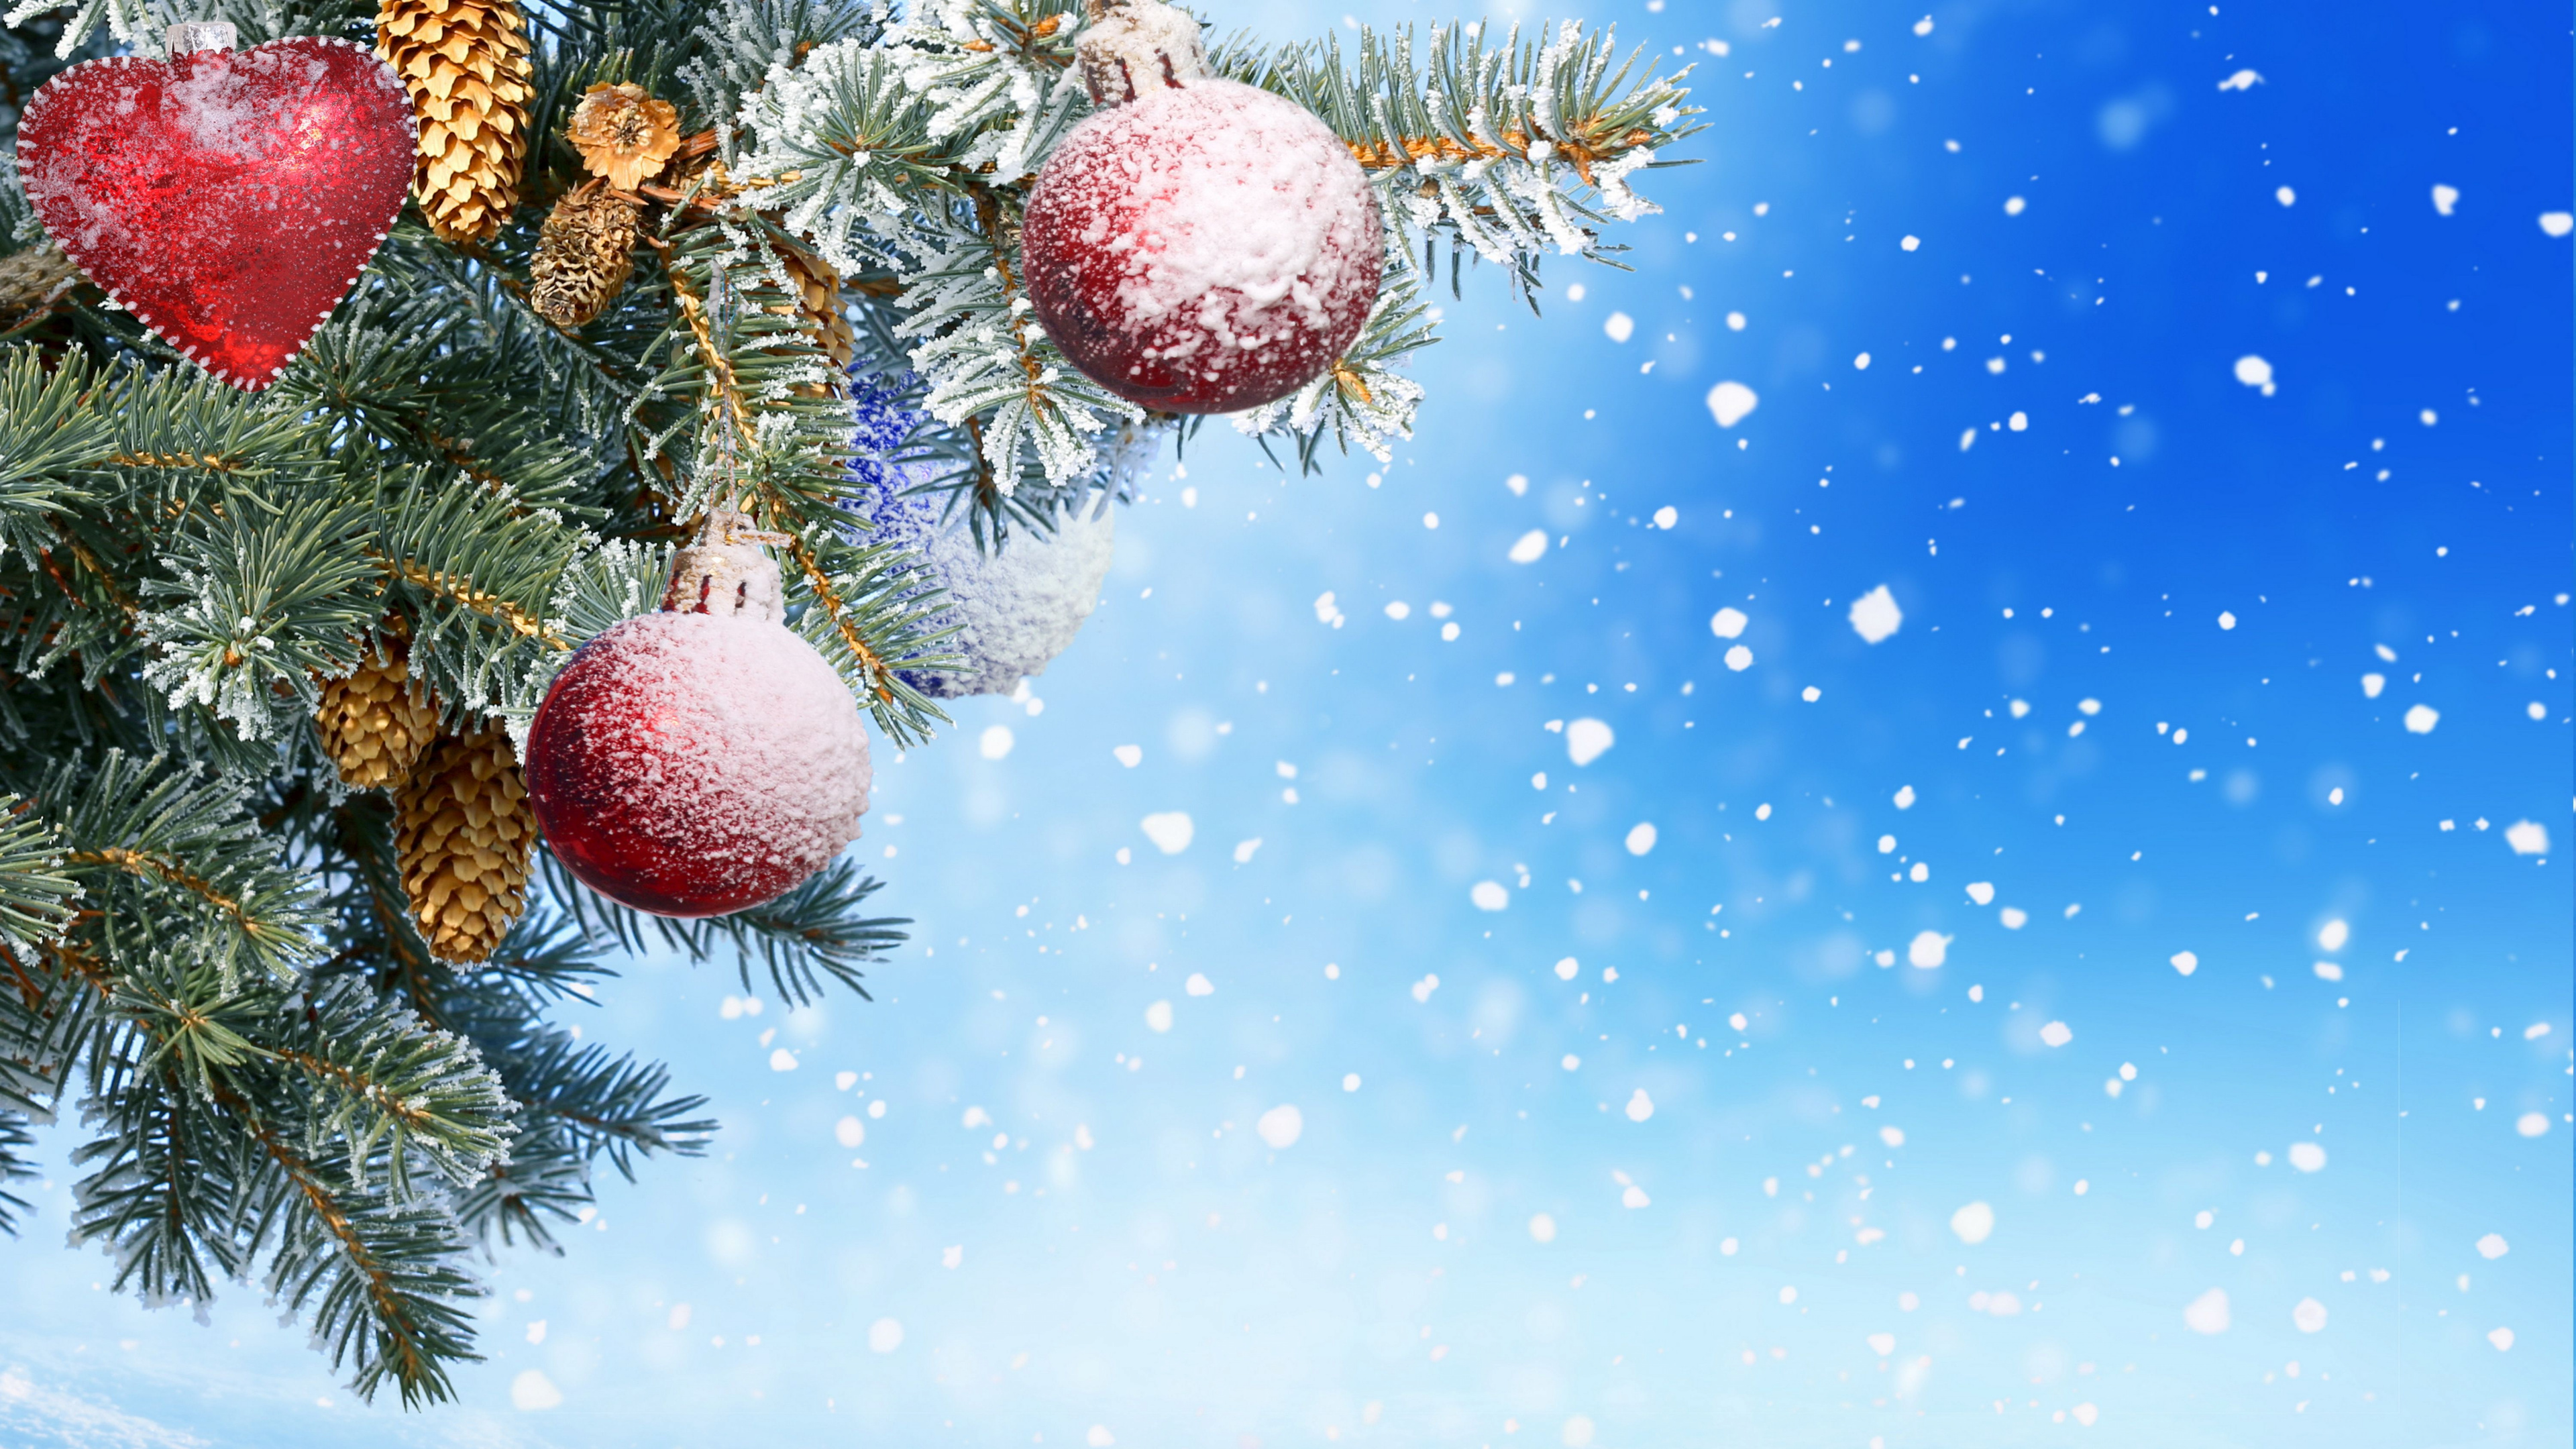 New Year, Christmas Day, Christmas Ornament, Tree, Fir. Wallpaper in 3840x2160 Resolution